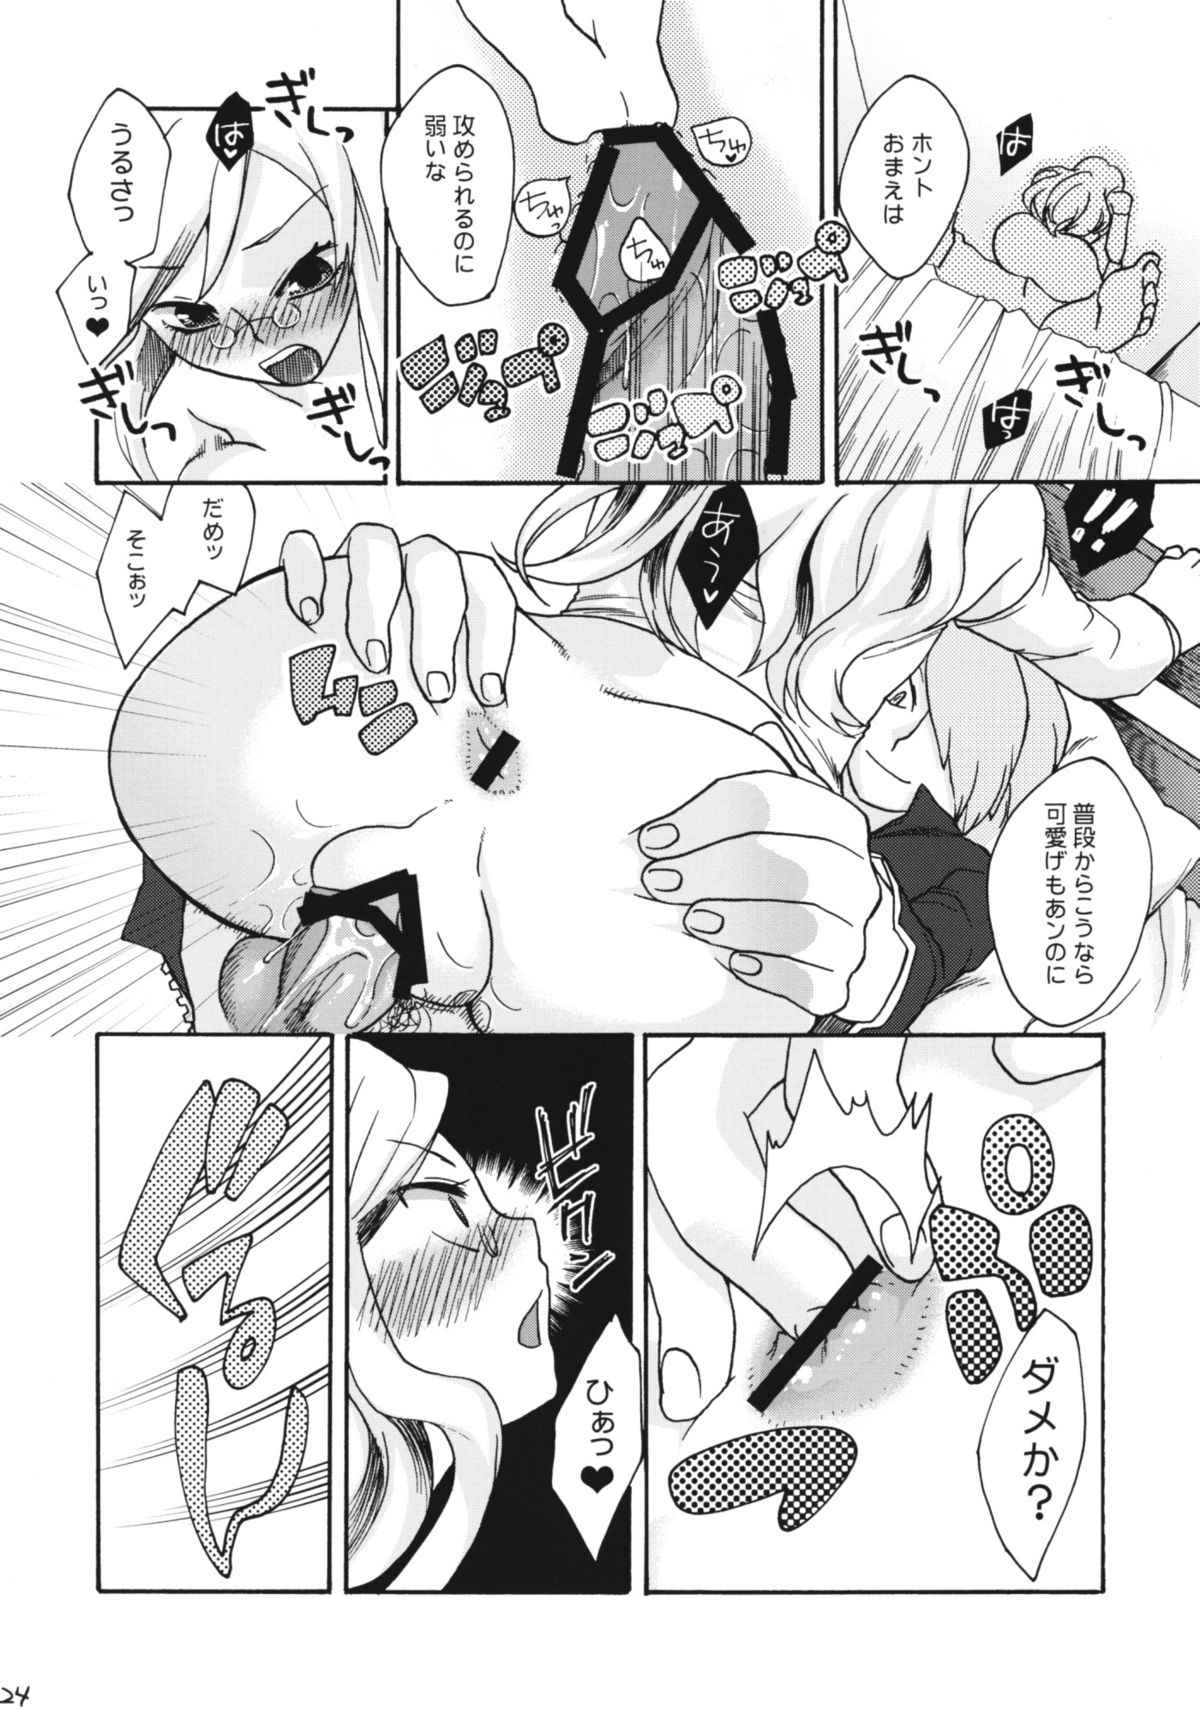 (ComiComi13) [Trip Spider (niwacho)] In You And Me (7th DRAGON) page 23 full